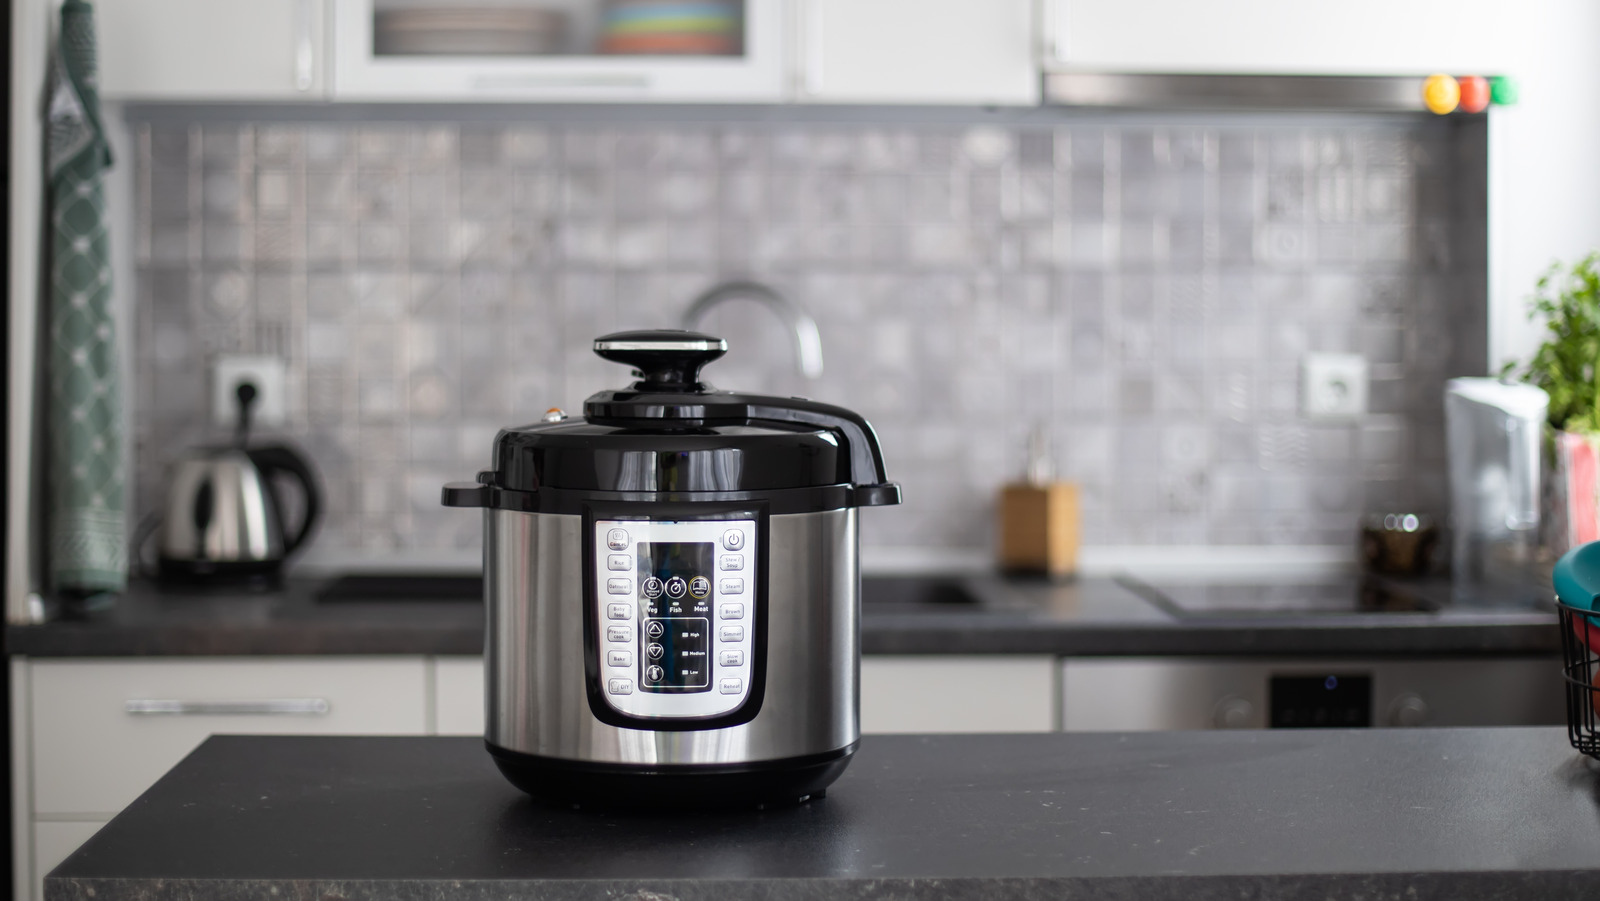 Instant Pot Quick Release vs. Natural Release - Pressure Cooking Today